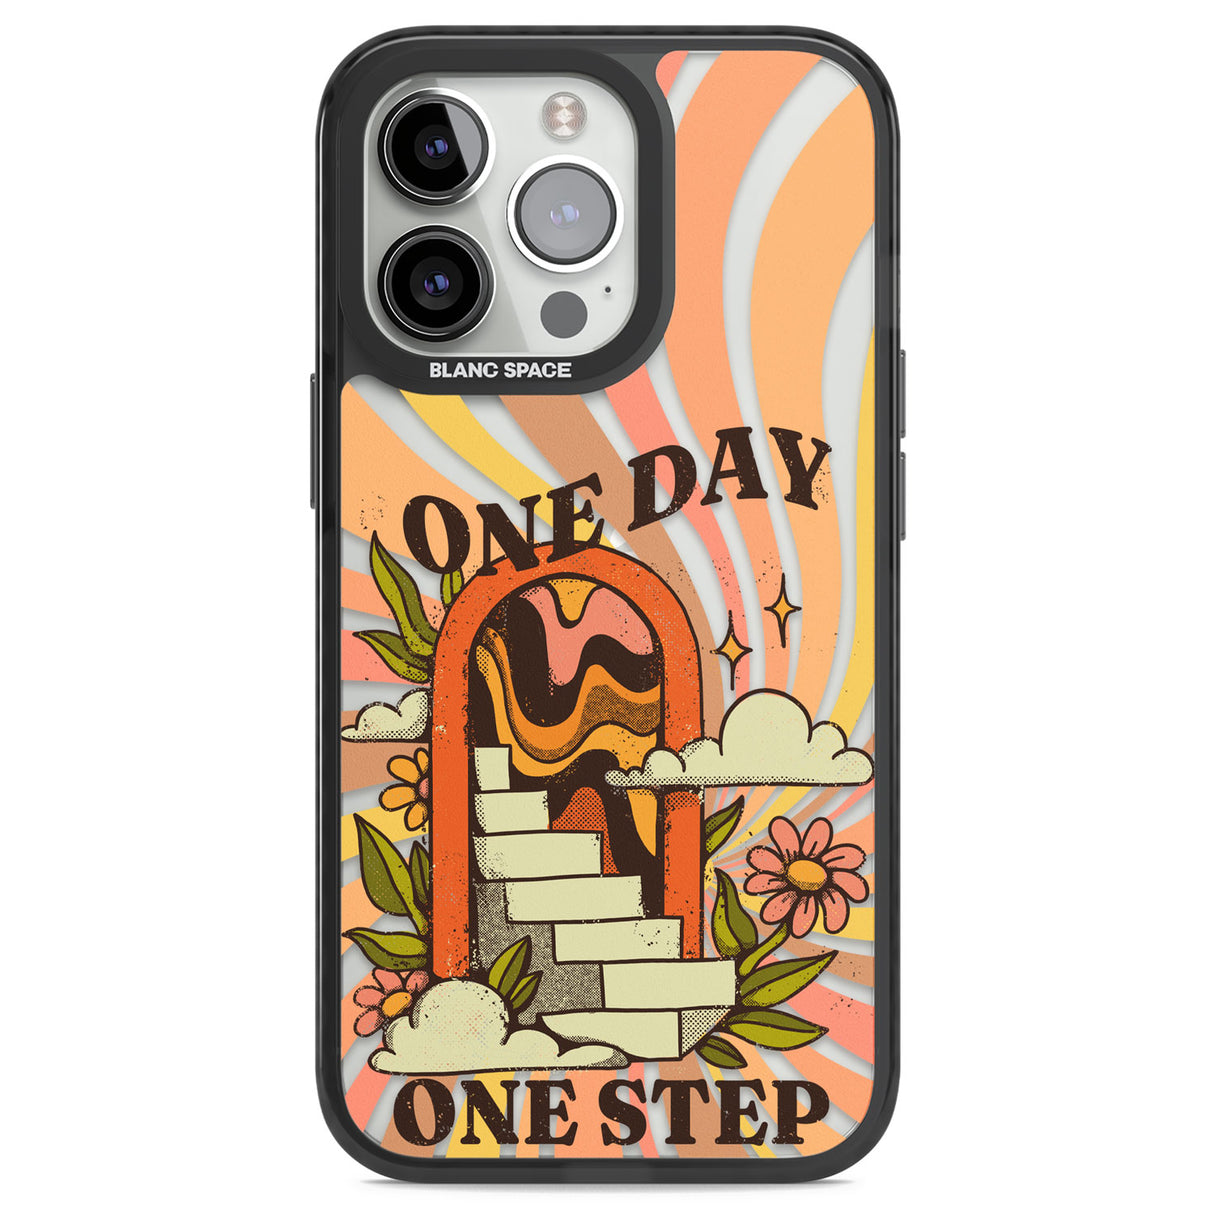 One Day One Step Black Impact Phone Case for iPhone 13 Pro, iPhone 14 Pro, iPhone 15 Pro